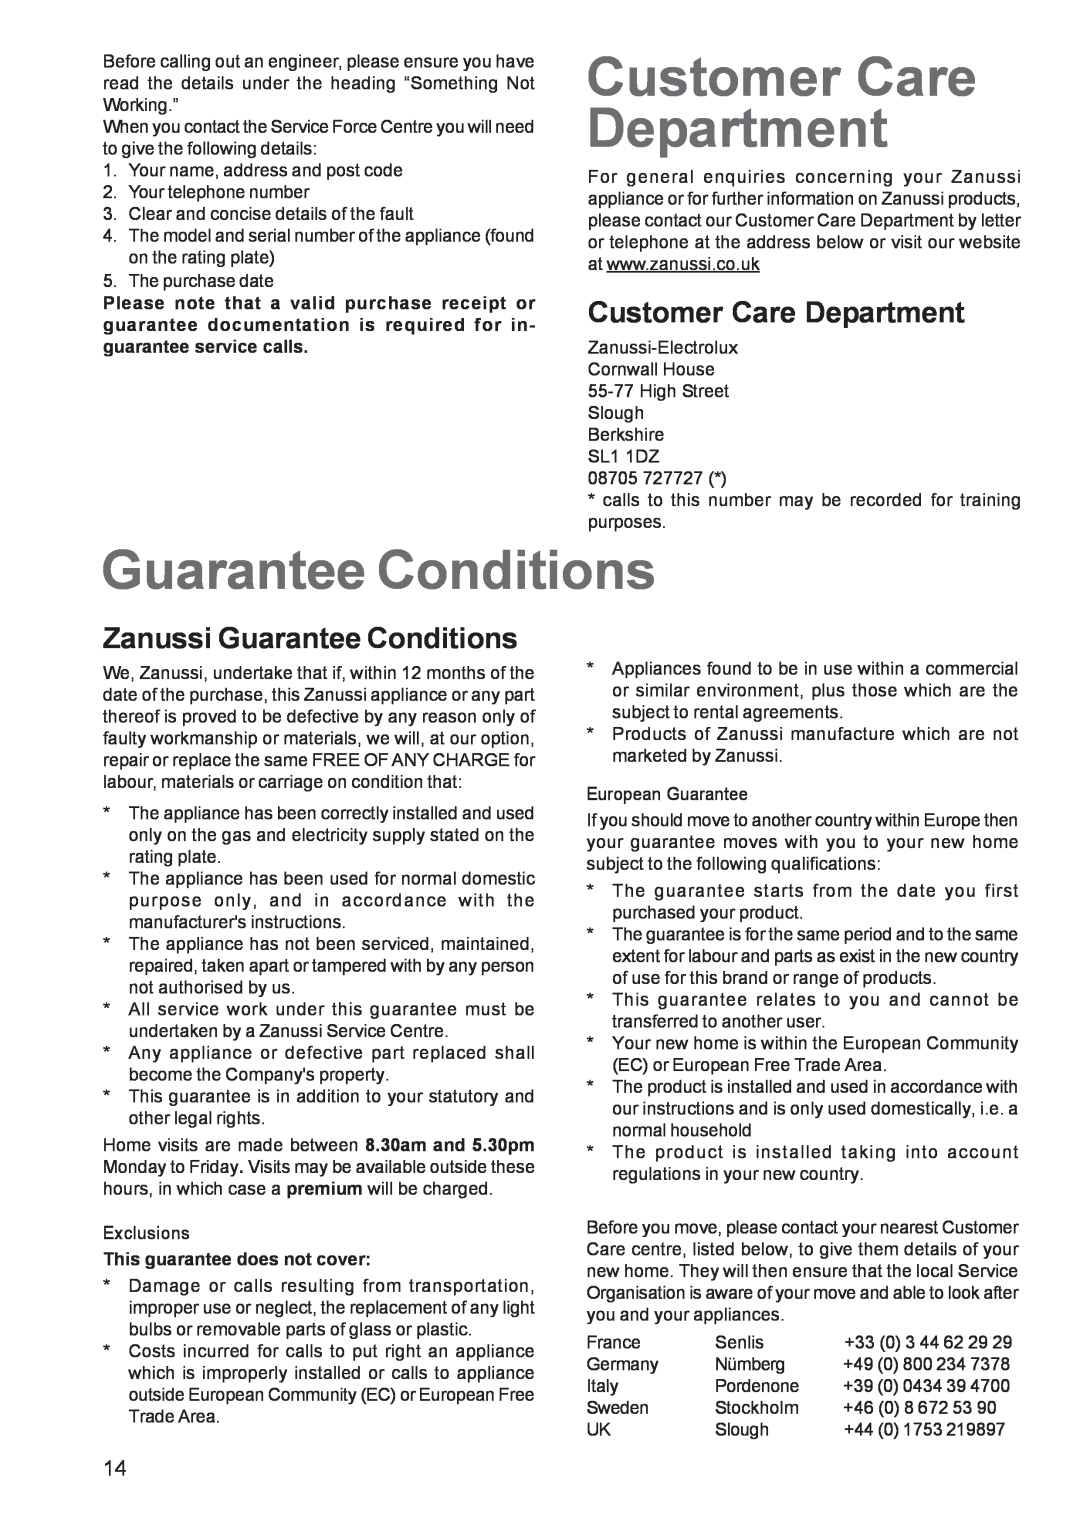 Zanussi ZCM 640 ZCM 641 manual Customer Care Department, Zanussi Guarantee Conditions, This guarantee does not cover 